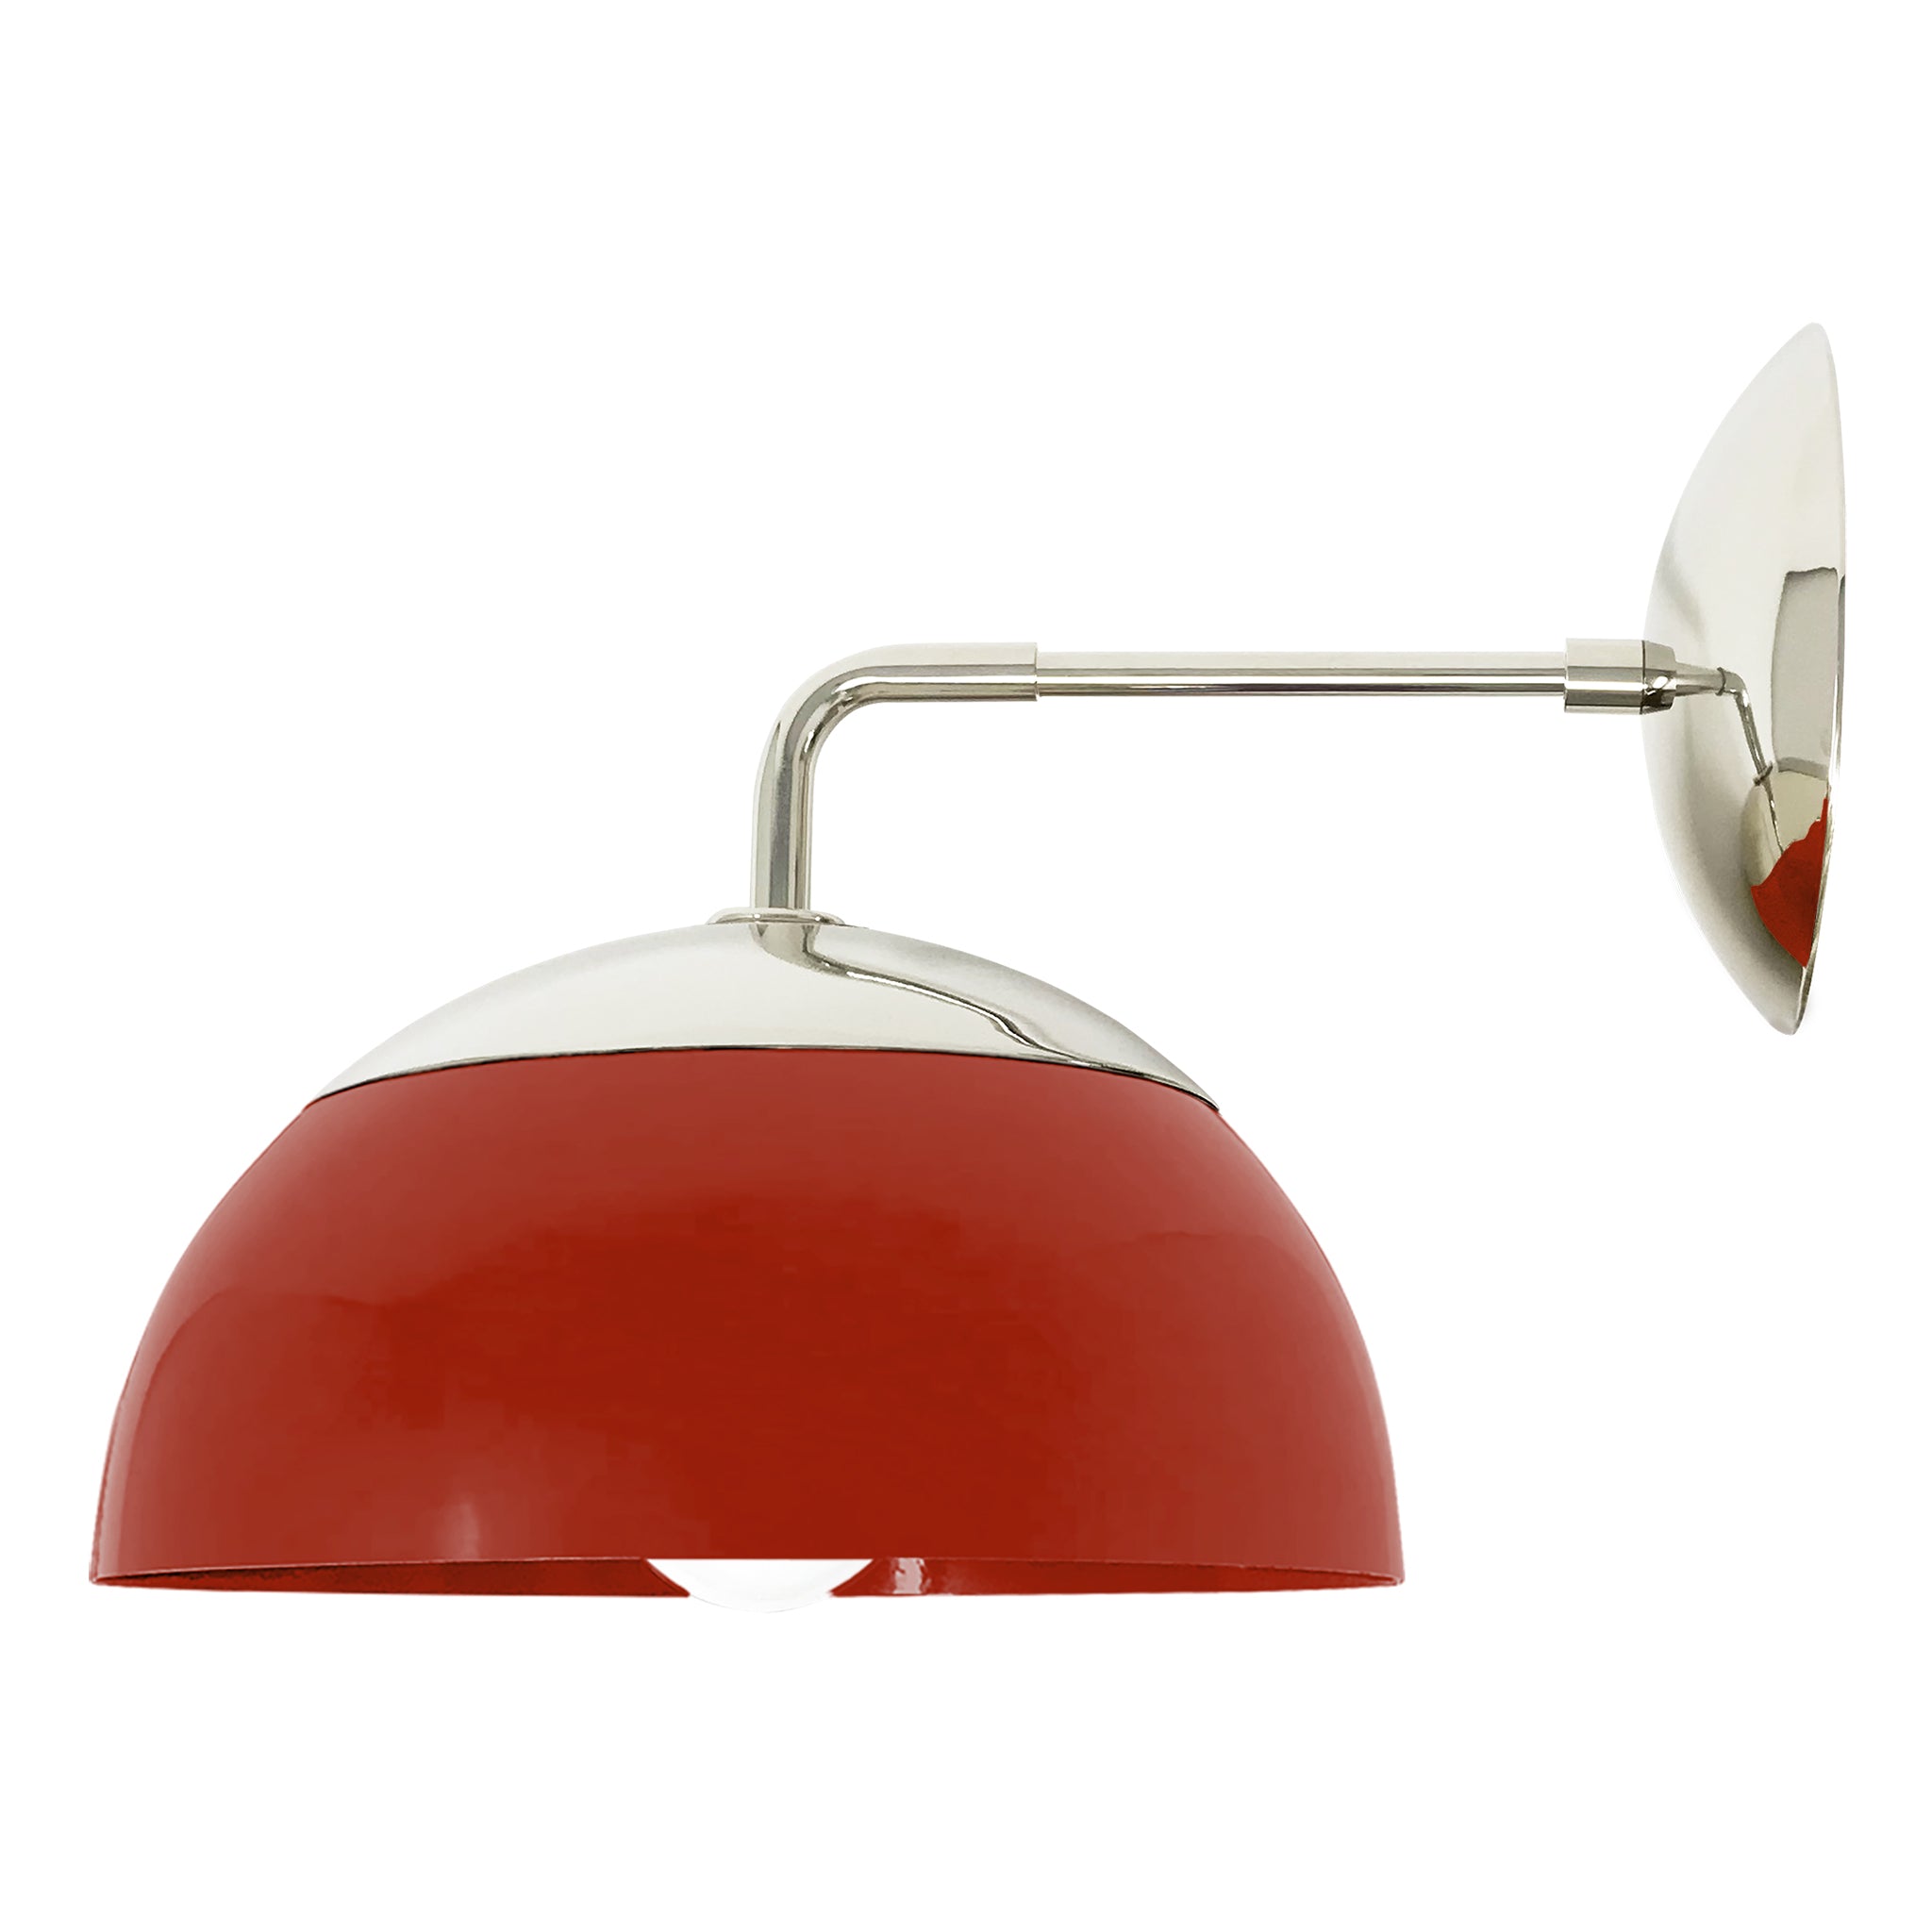 Nickel and riding hood red color Cadbury sconce 8" Dutton Brown lighting